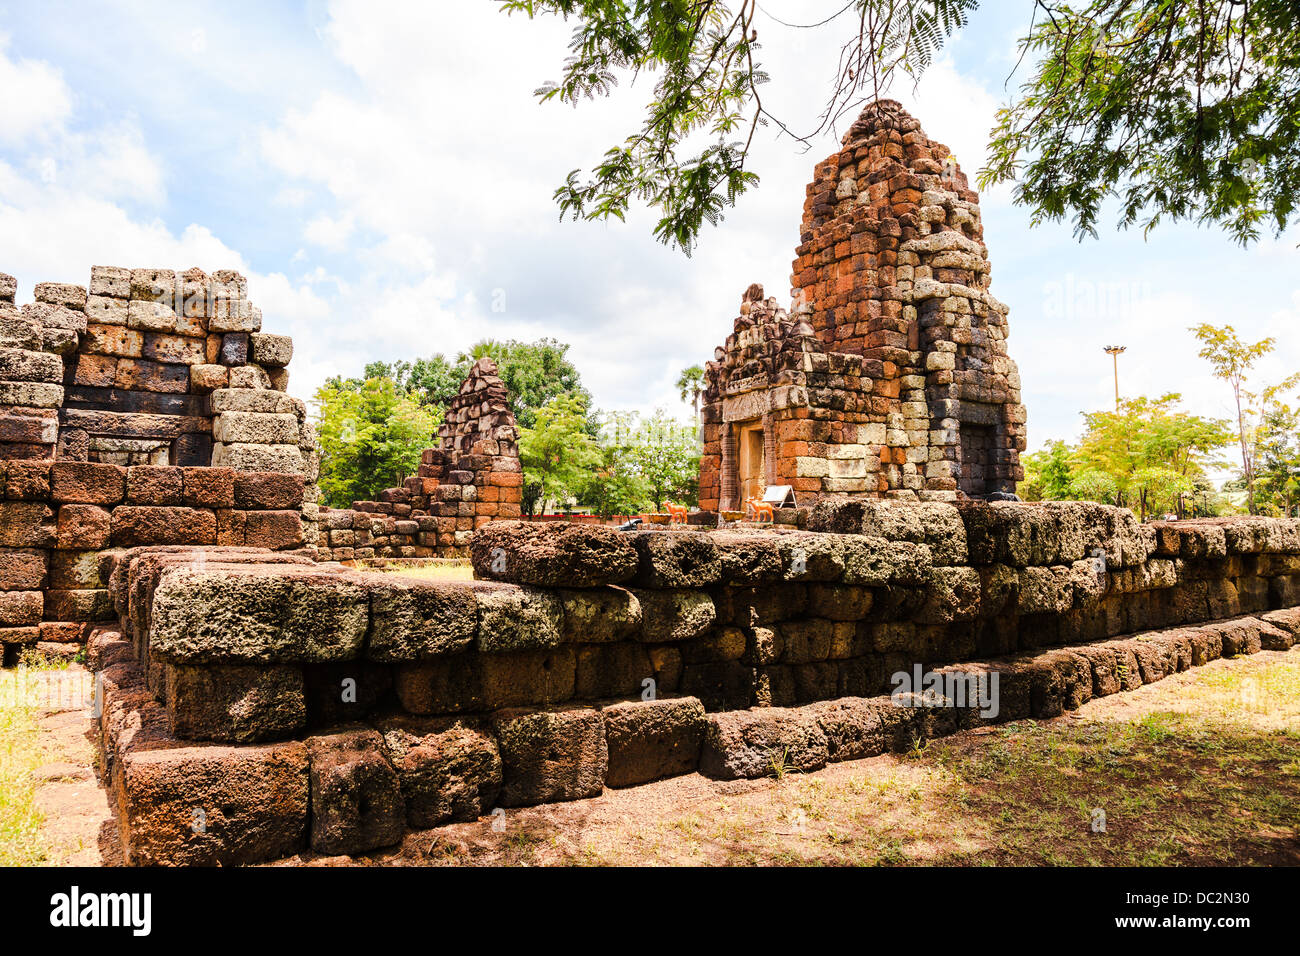 Prangkhu, ancient khmer architecture in chaiyaphum province, thailand Stock Photo